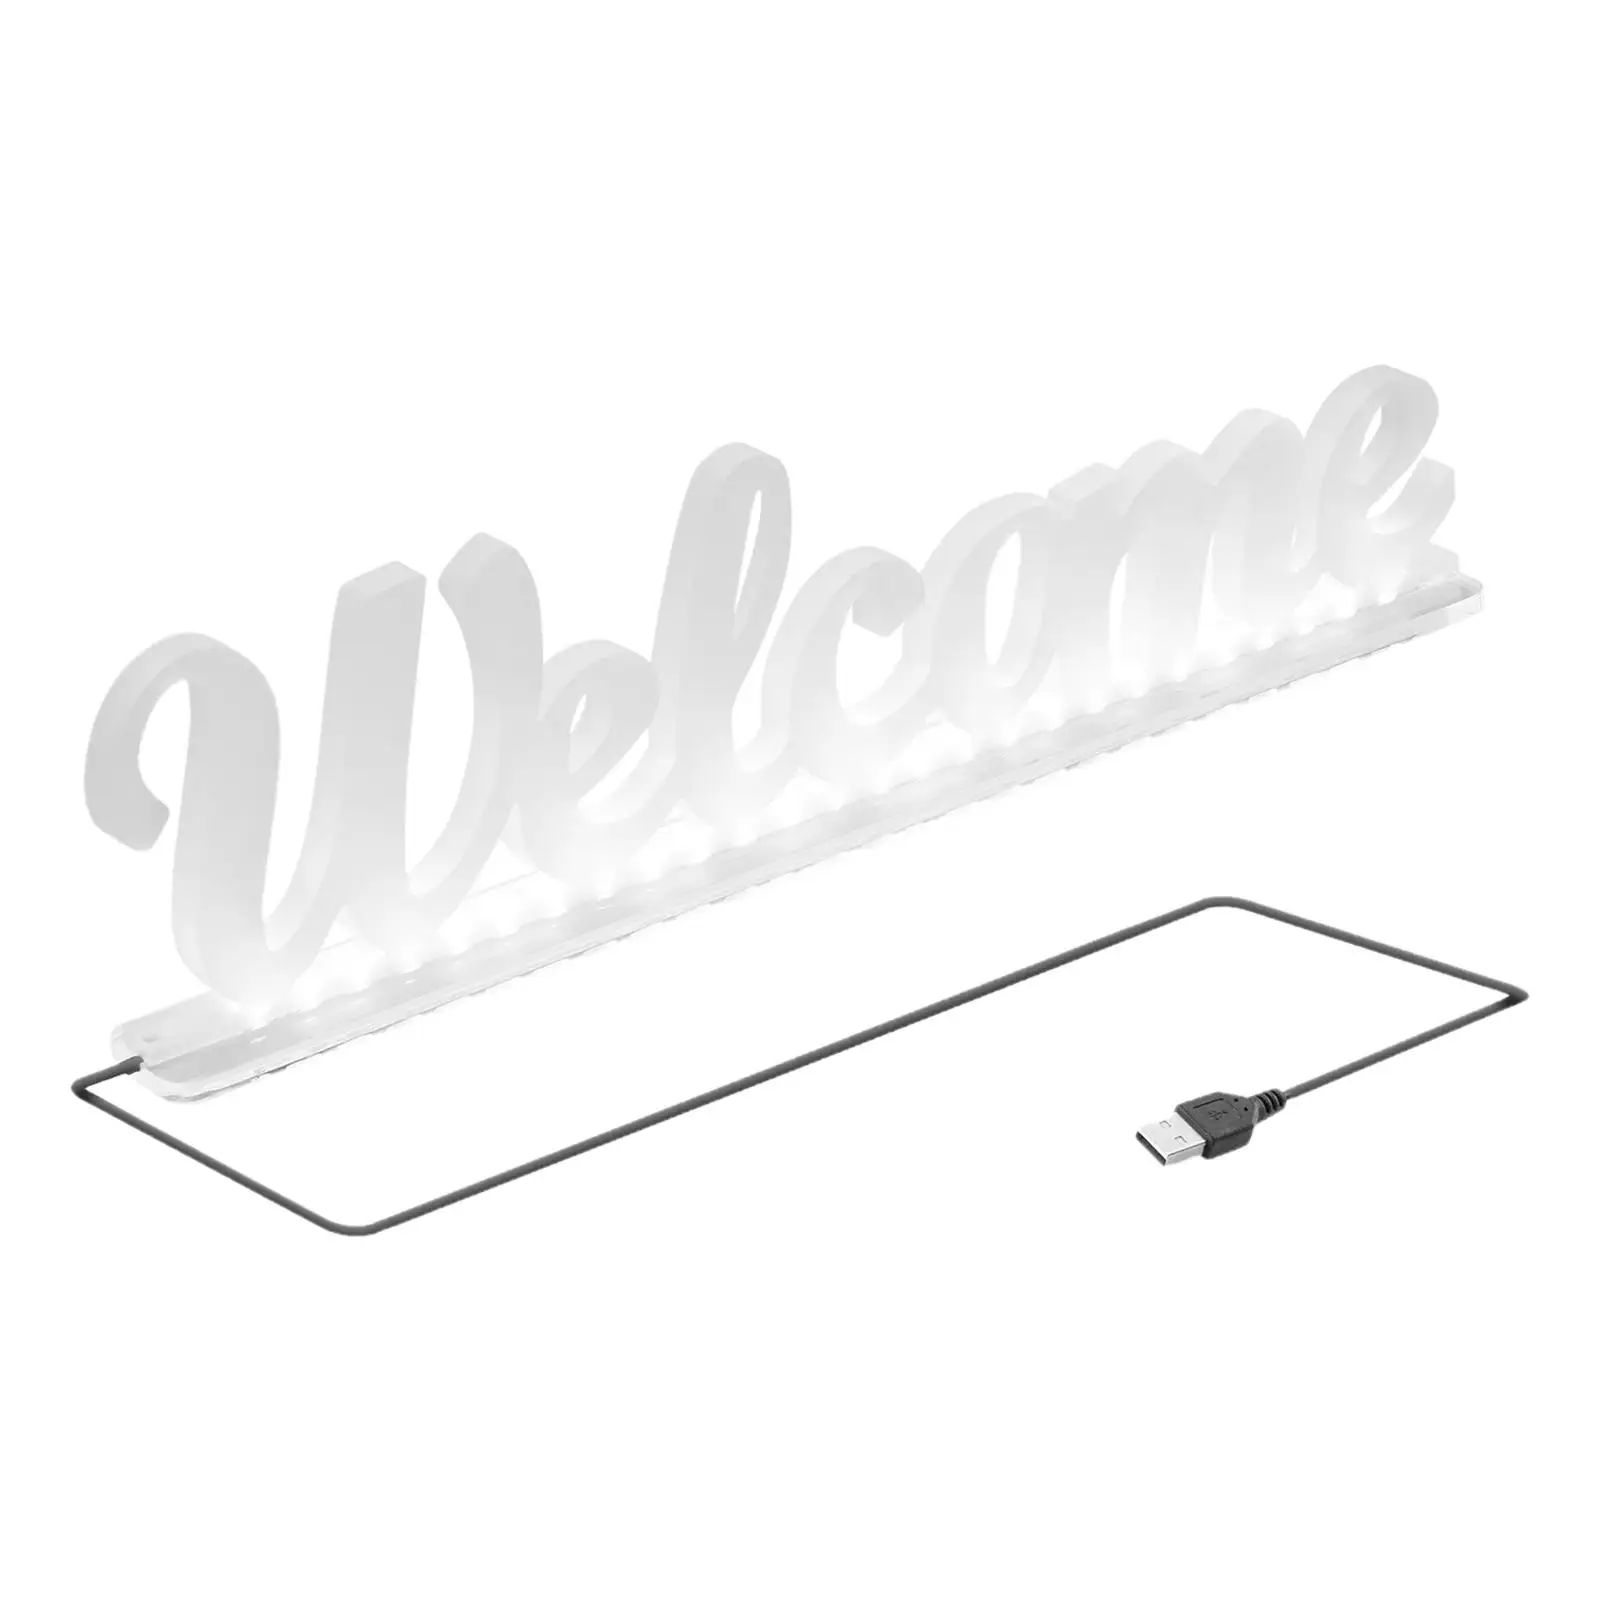 

Welcome Neon Sign, Neon Light for Man Cave Atmosphere Lights USB Clear Light up